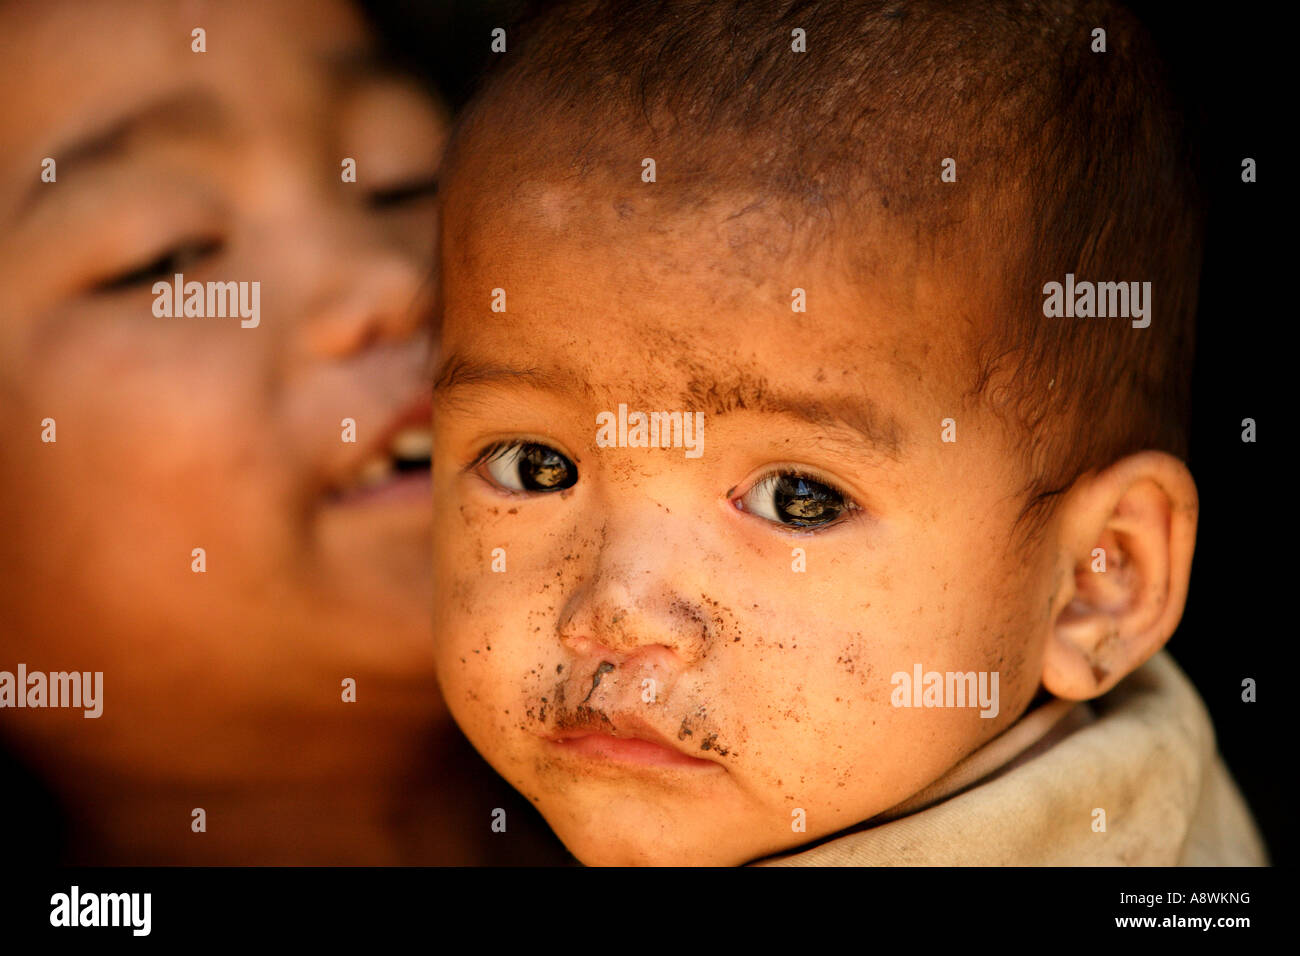 Asia, Myanmar, children from Palaung hill tribe Stock Photo